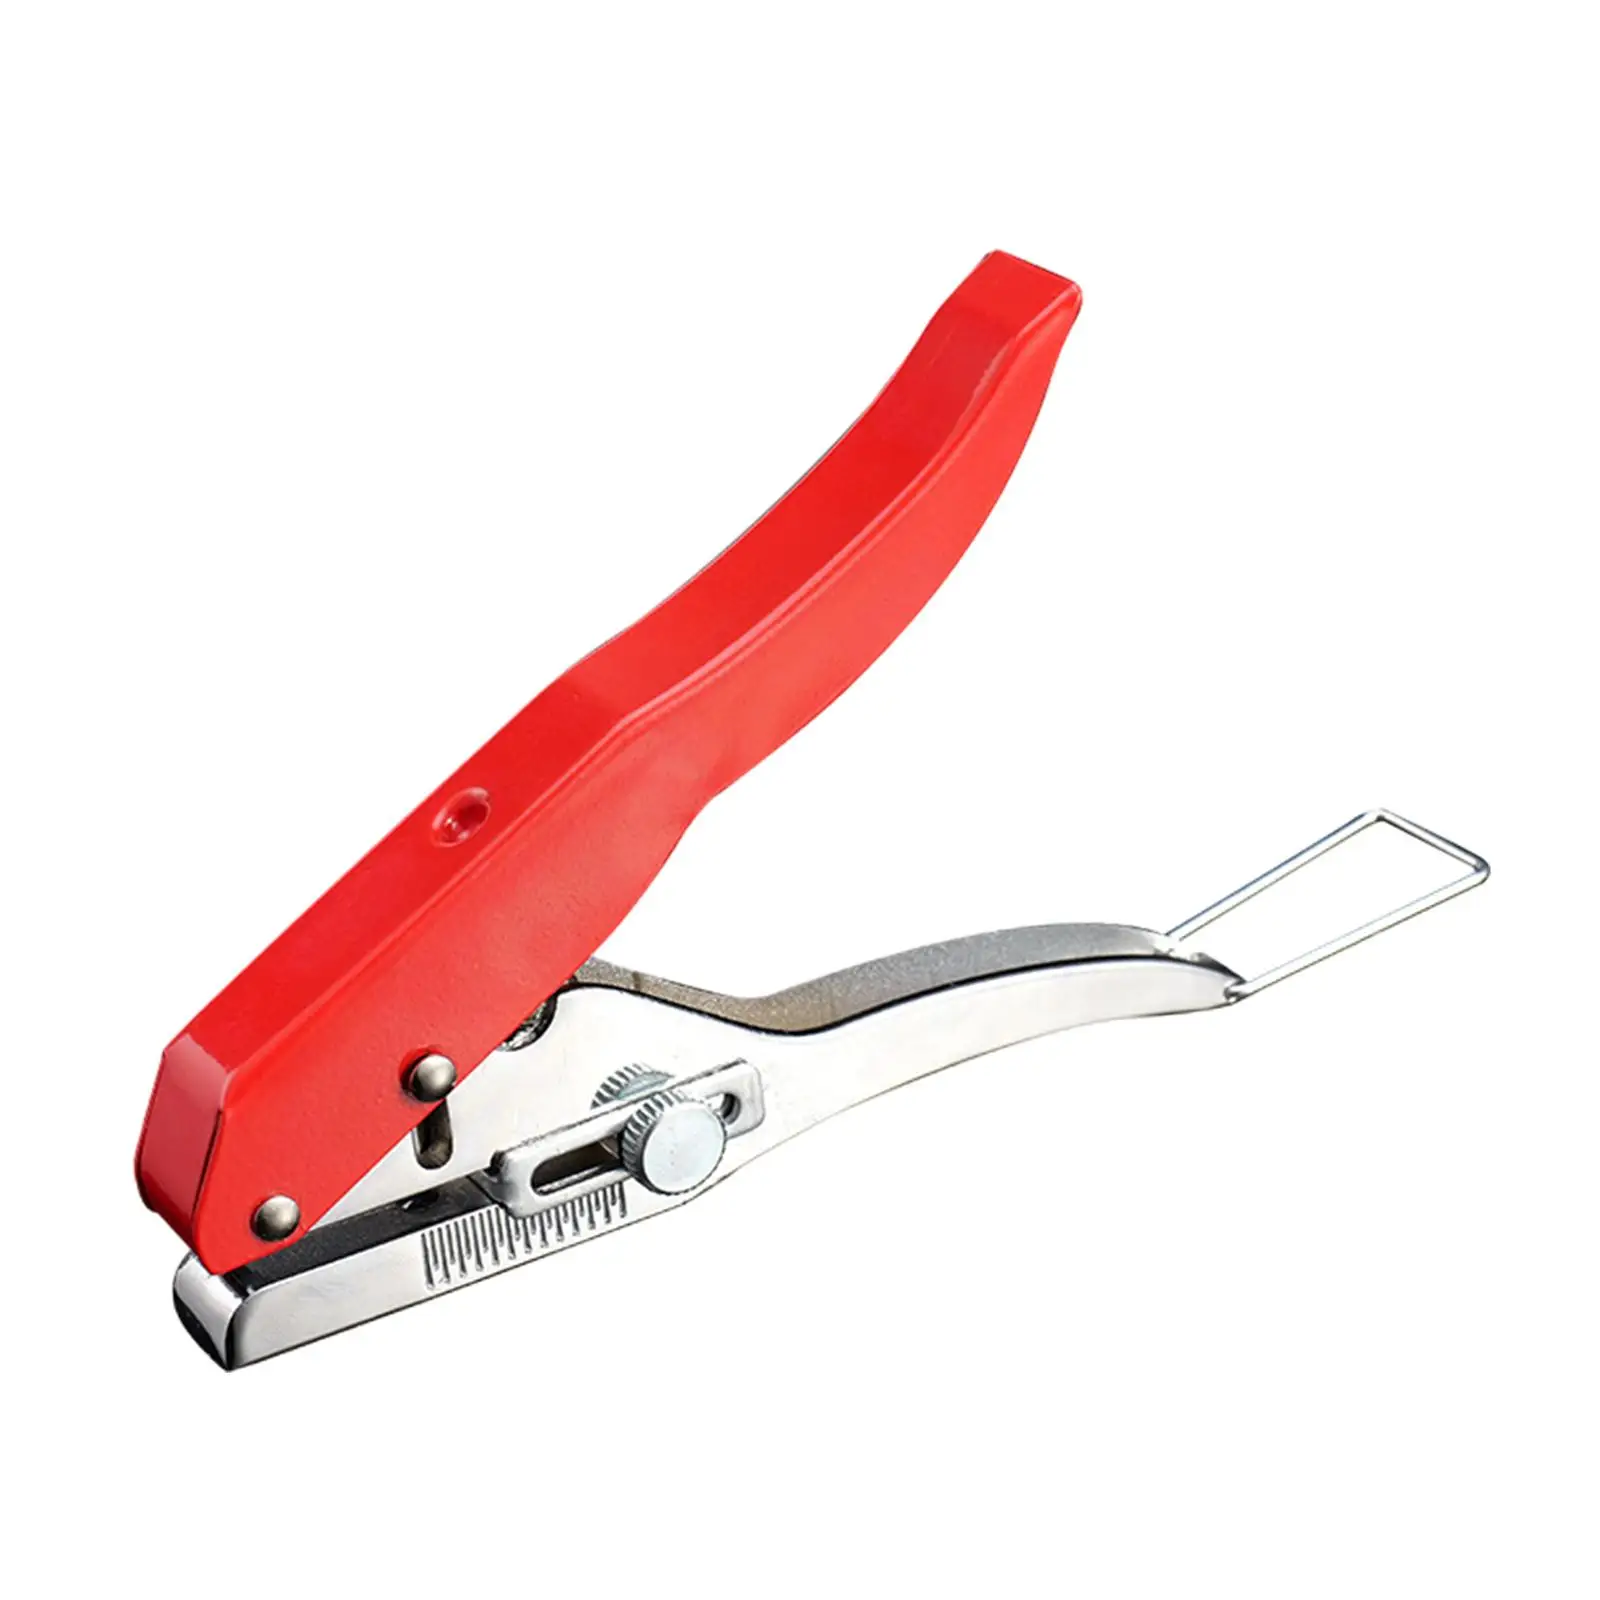 Single Hole Punch Portable Round Puncher Pliers with Scale Adjustable Hole Puncher for Hard Film Paper Photo Art Project